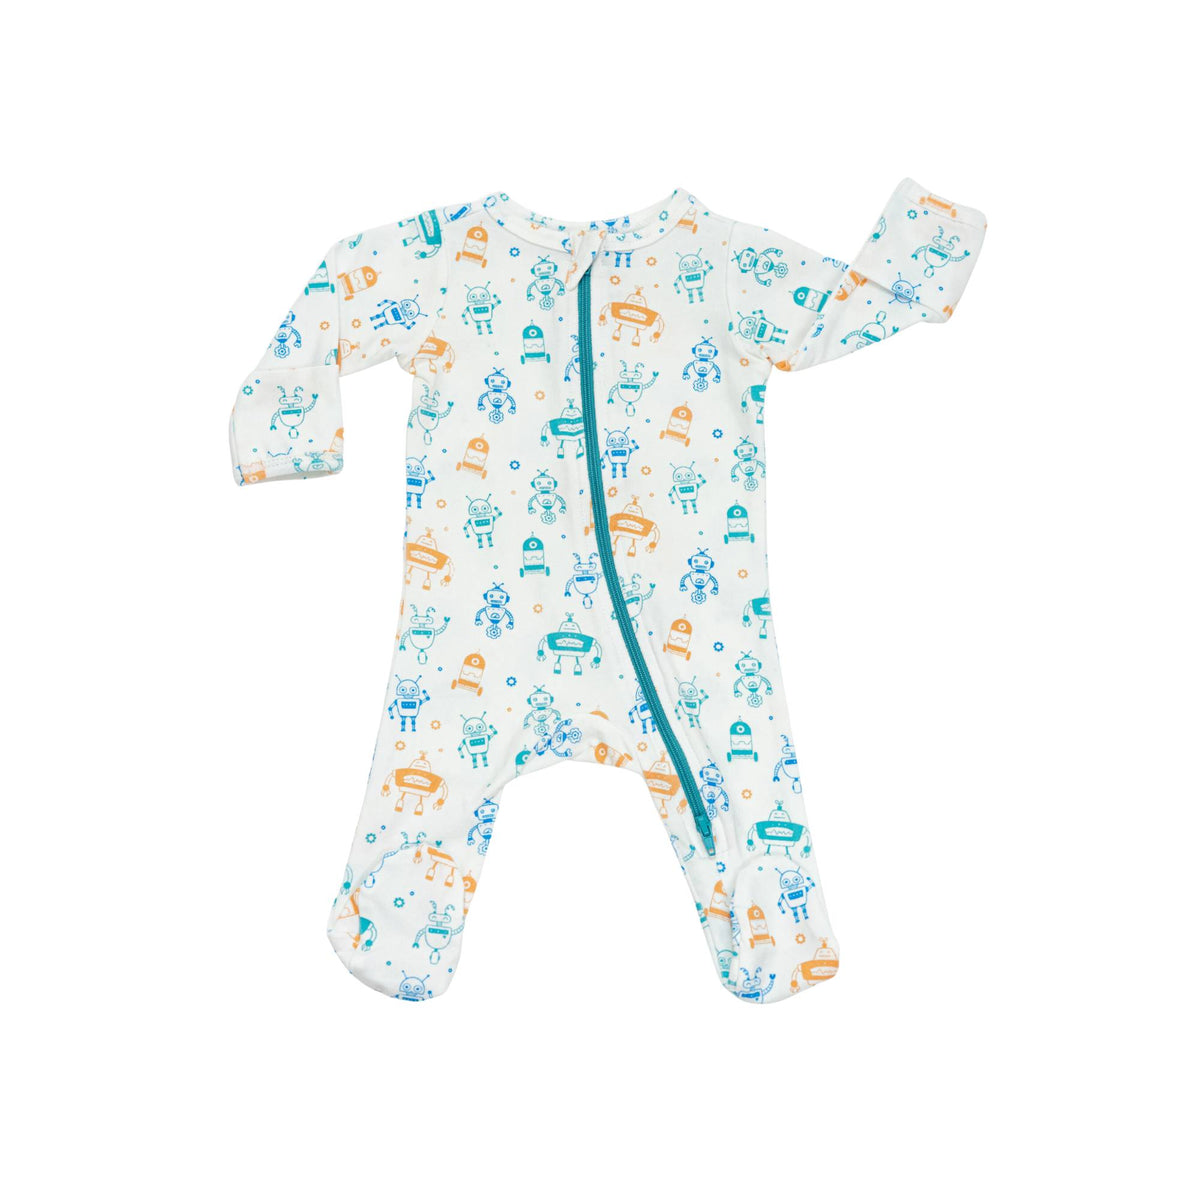 Norani Baby Footed Zipper Onesie in Blue Green and Orange Robots